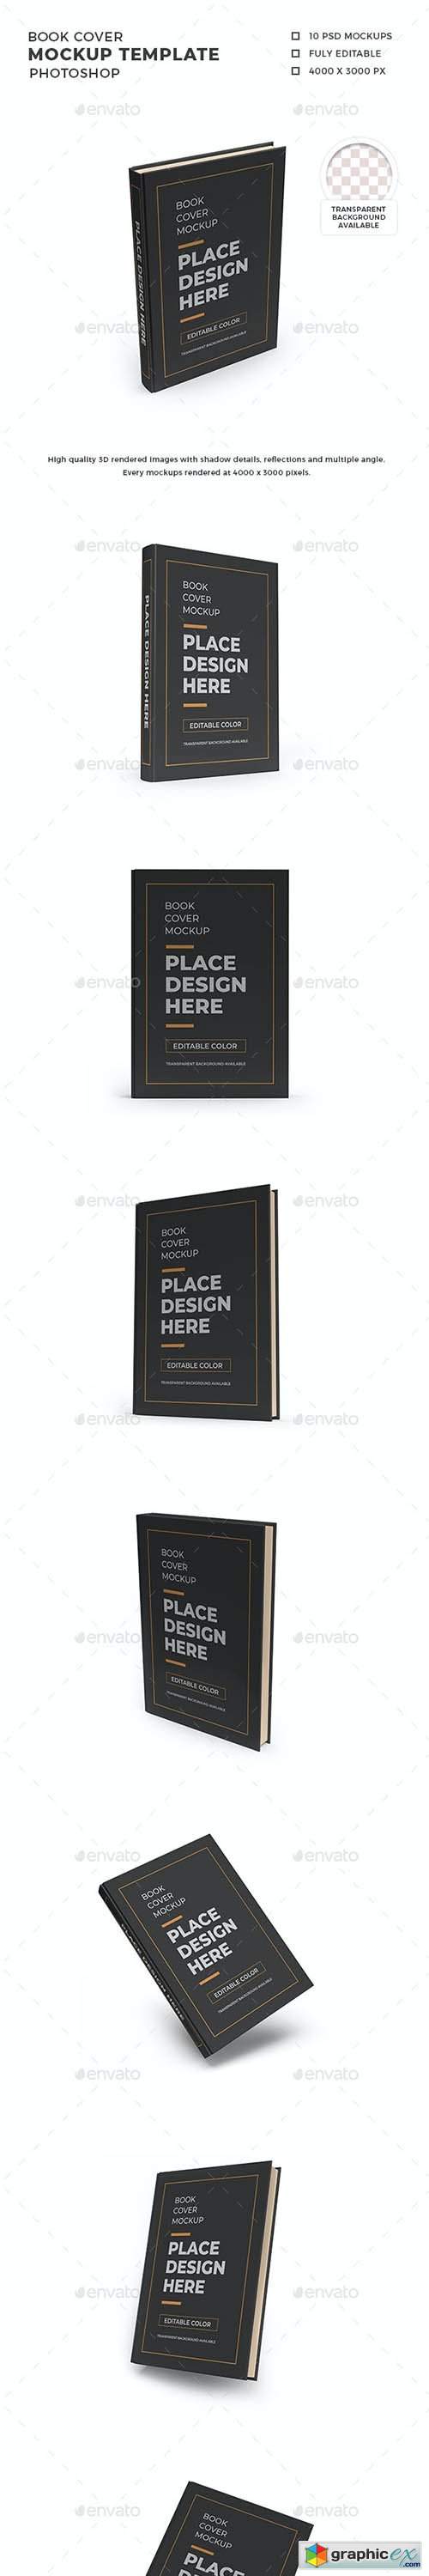  Book Cover 3D Mockup Template 